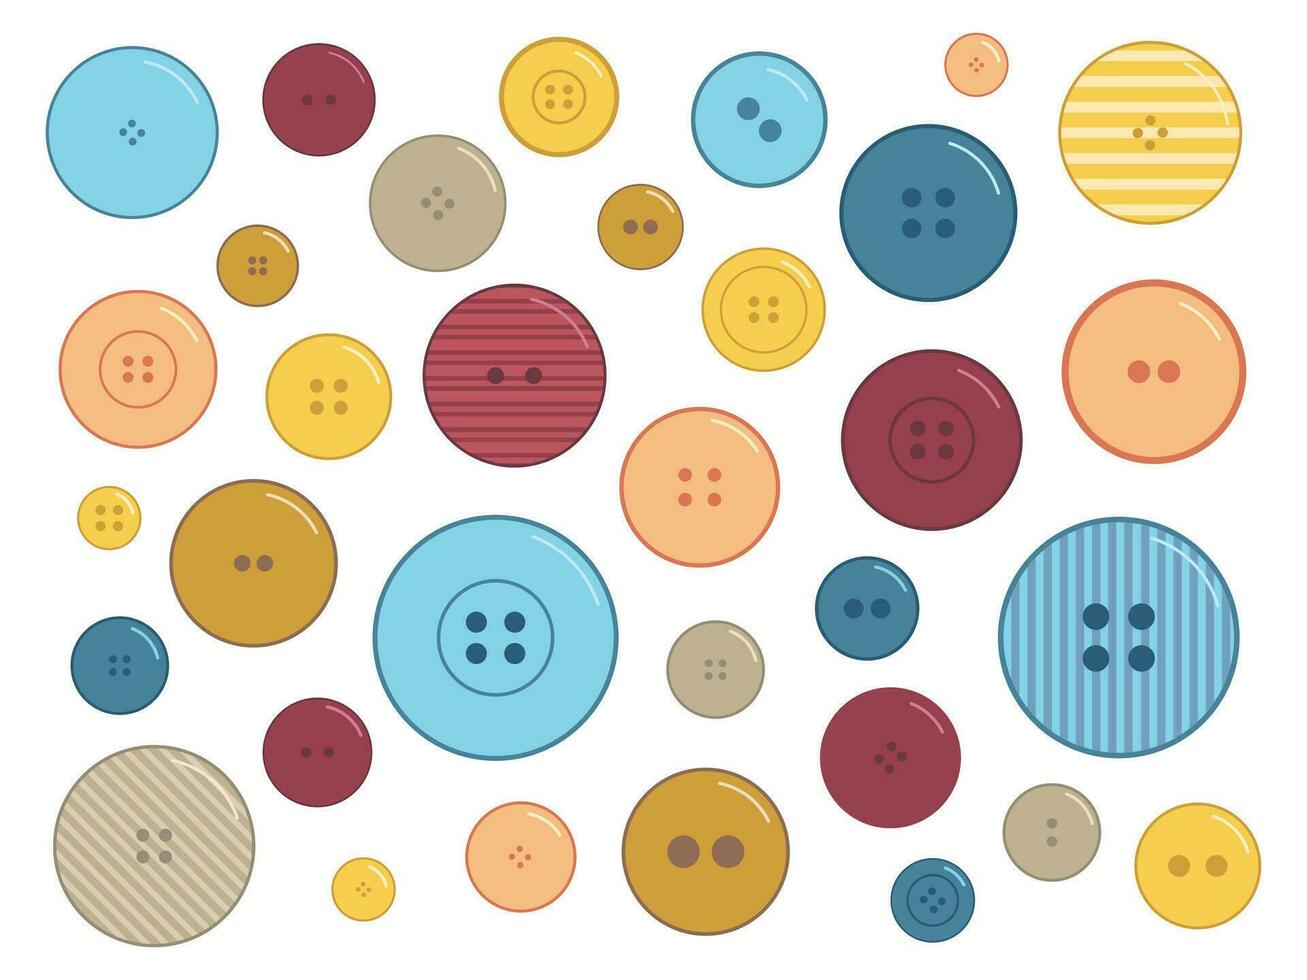 Vector collection of buttons for clothes, art and crafts in various bright colors. Fashion and needlework vector illustration